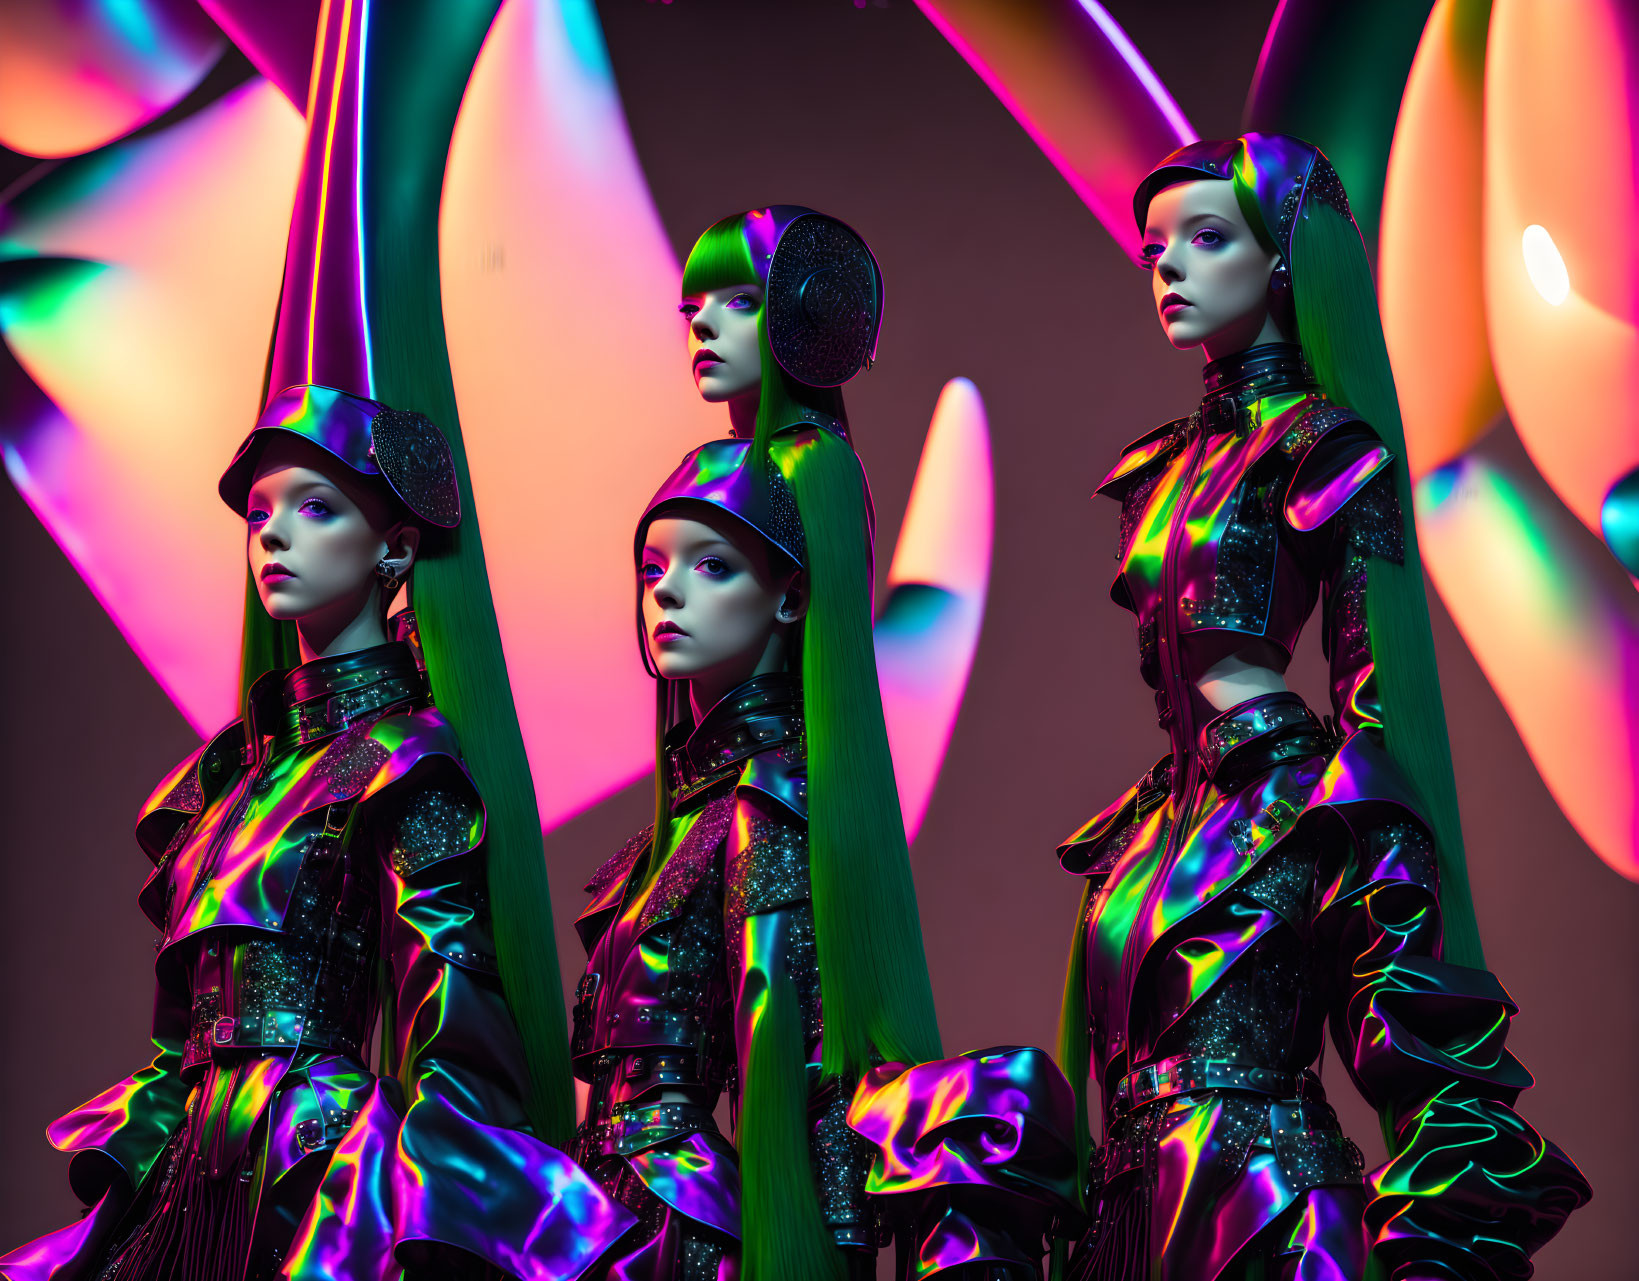 Iridescent Outfits and Green Hair on Futuristic Mannequins